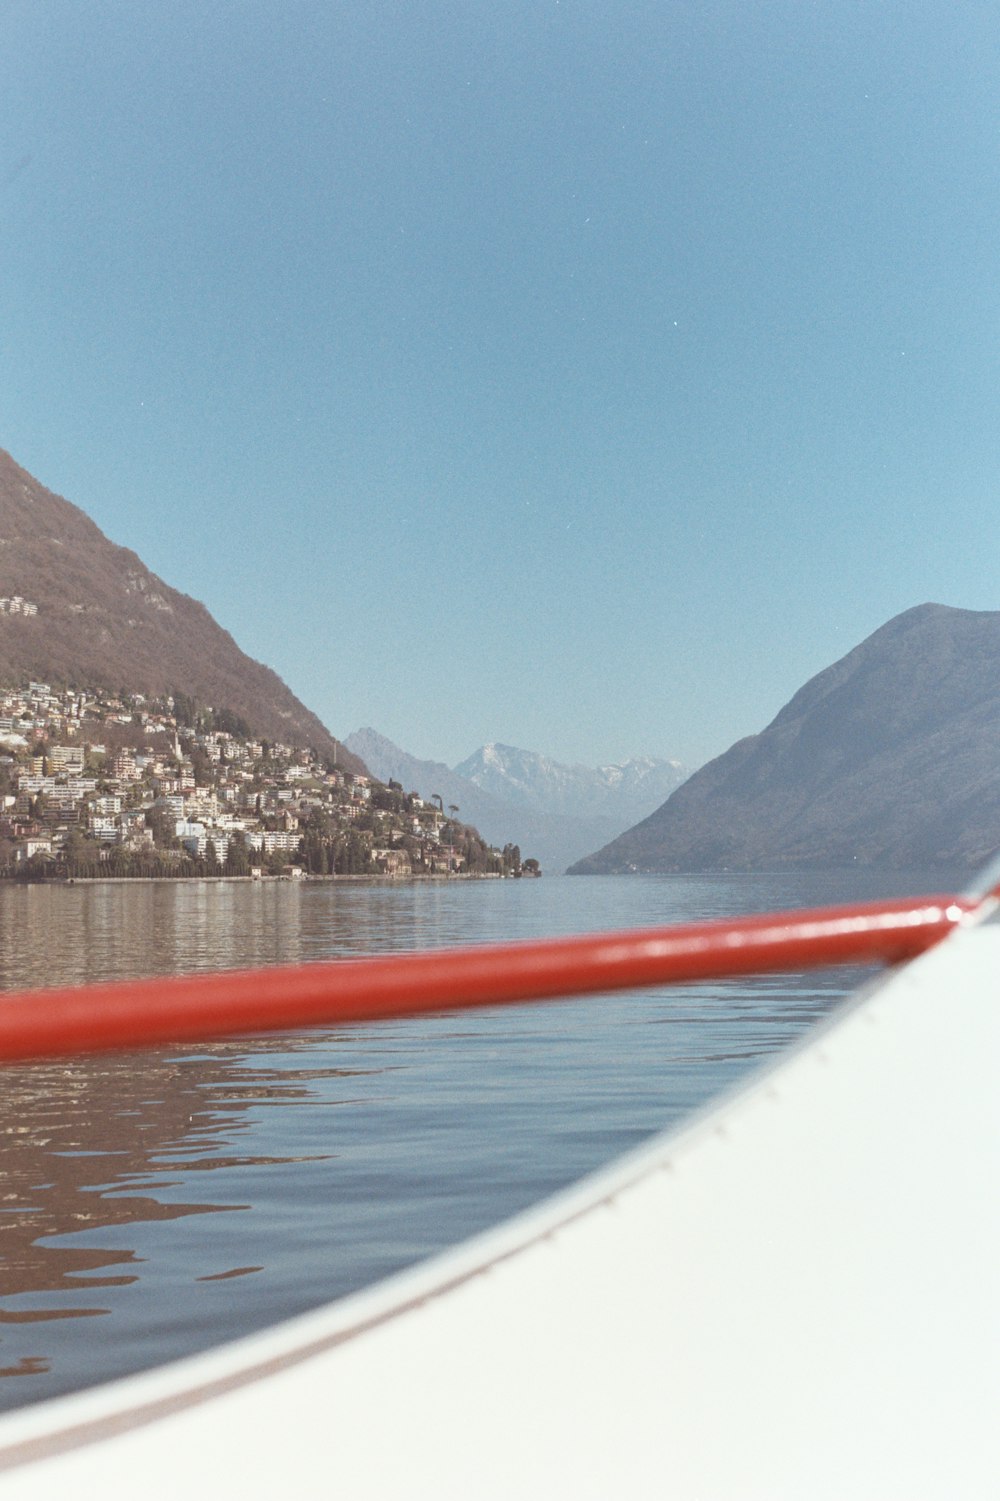 a view from a boat on a lake with mountains in the background